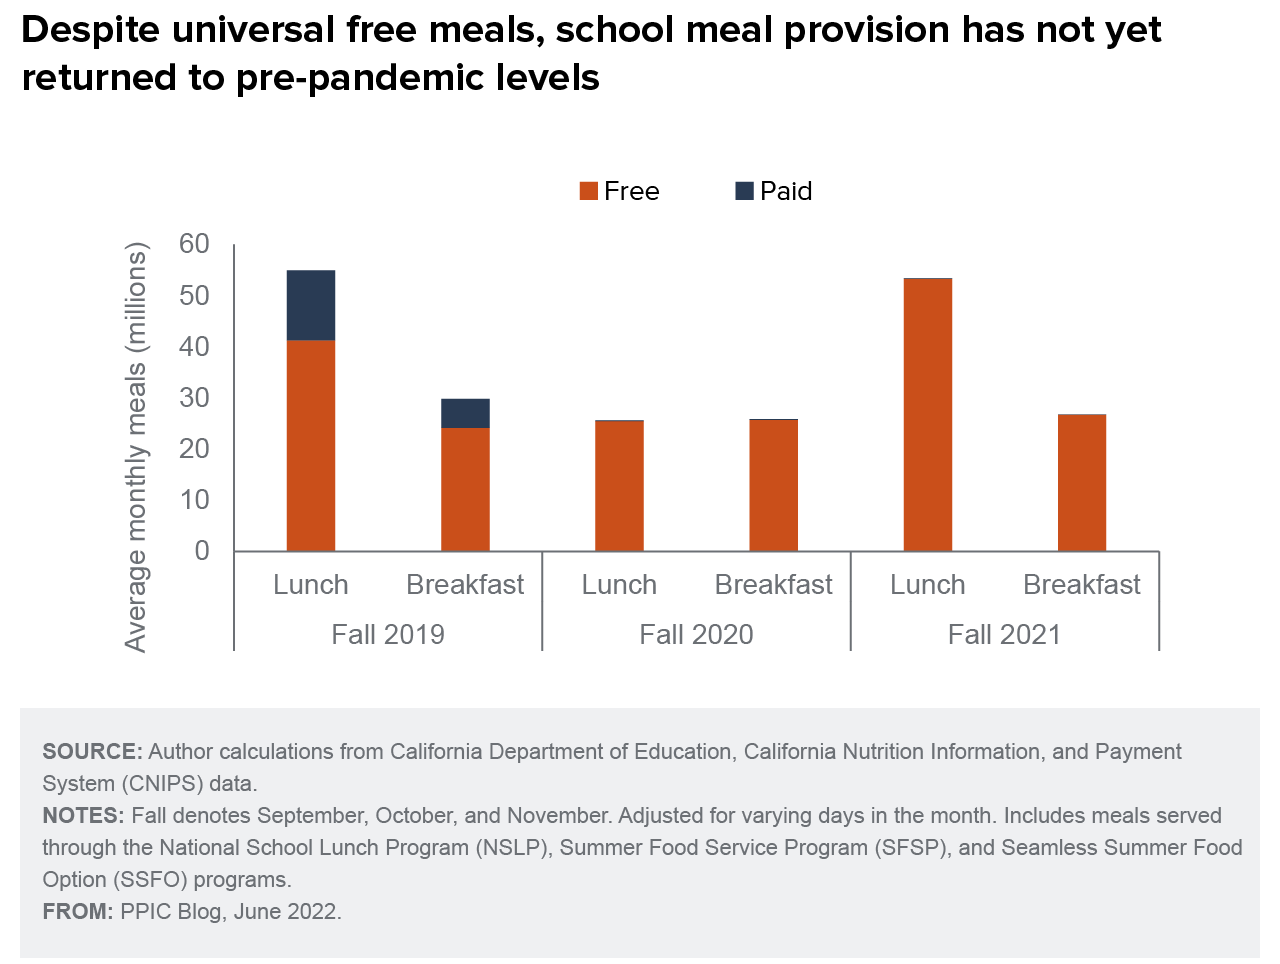 figure - Despite universal free meals, school meal provision has not yet returned to pre-pandemic levels